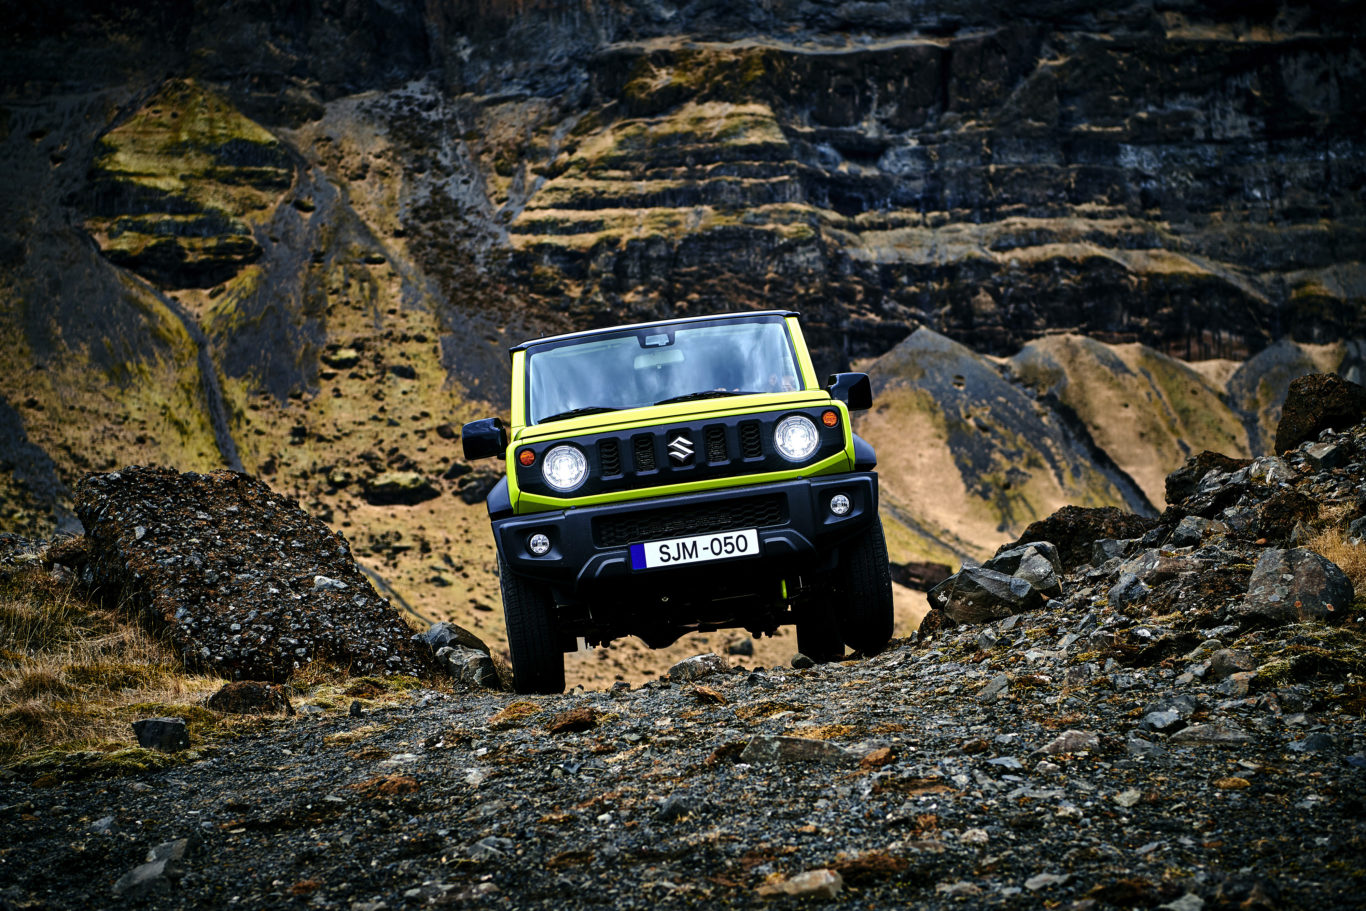 The Jimny is hugely capable off-road